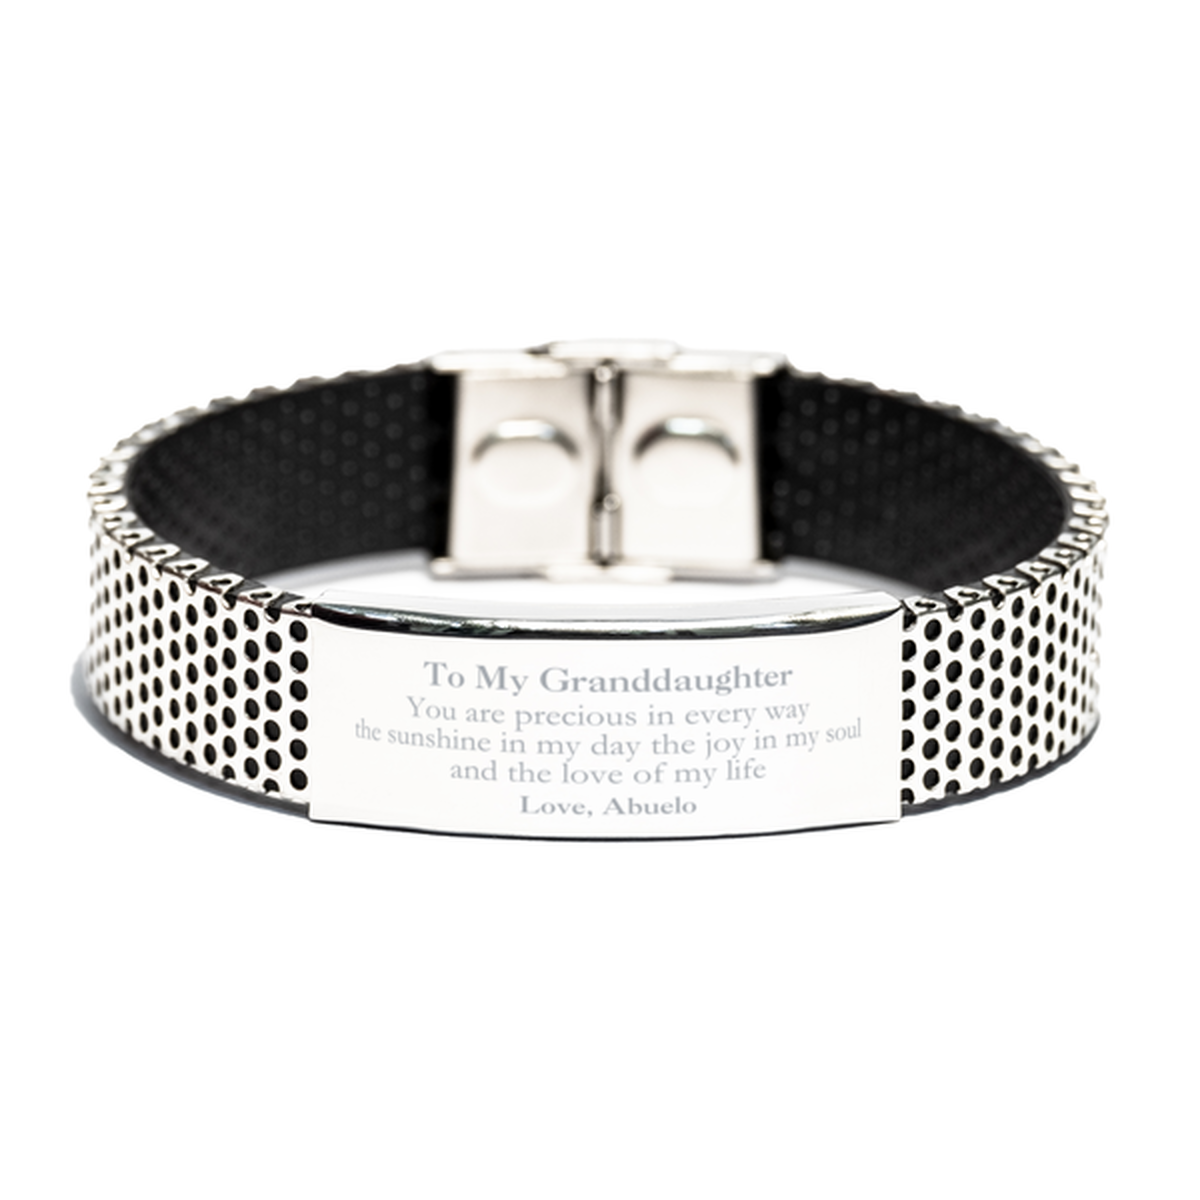 Graduation Gifts for Granddaughter Stainless Steel Bracelet Present from Abuelo, Christmas Granddaughter Birthday Gifts Granddaughter You are precious in every way the sunshine in my day. Love, Abuelo